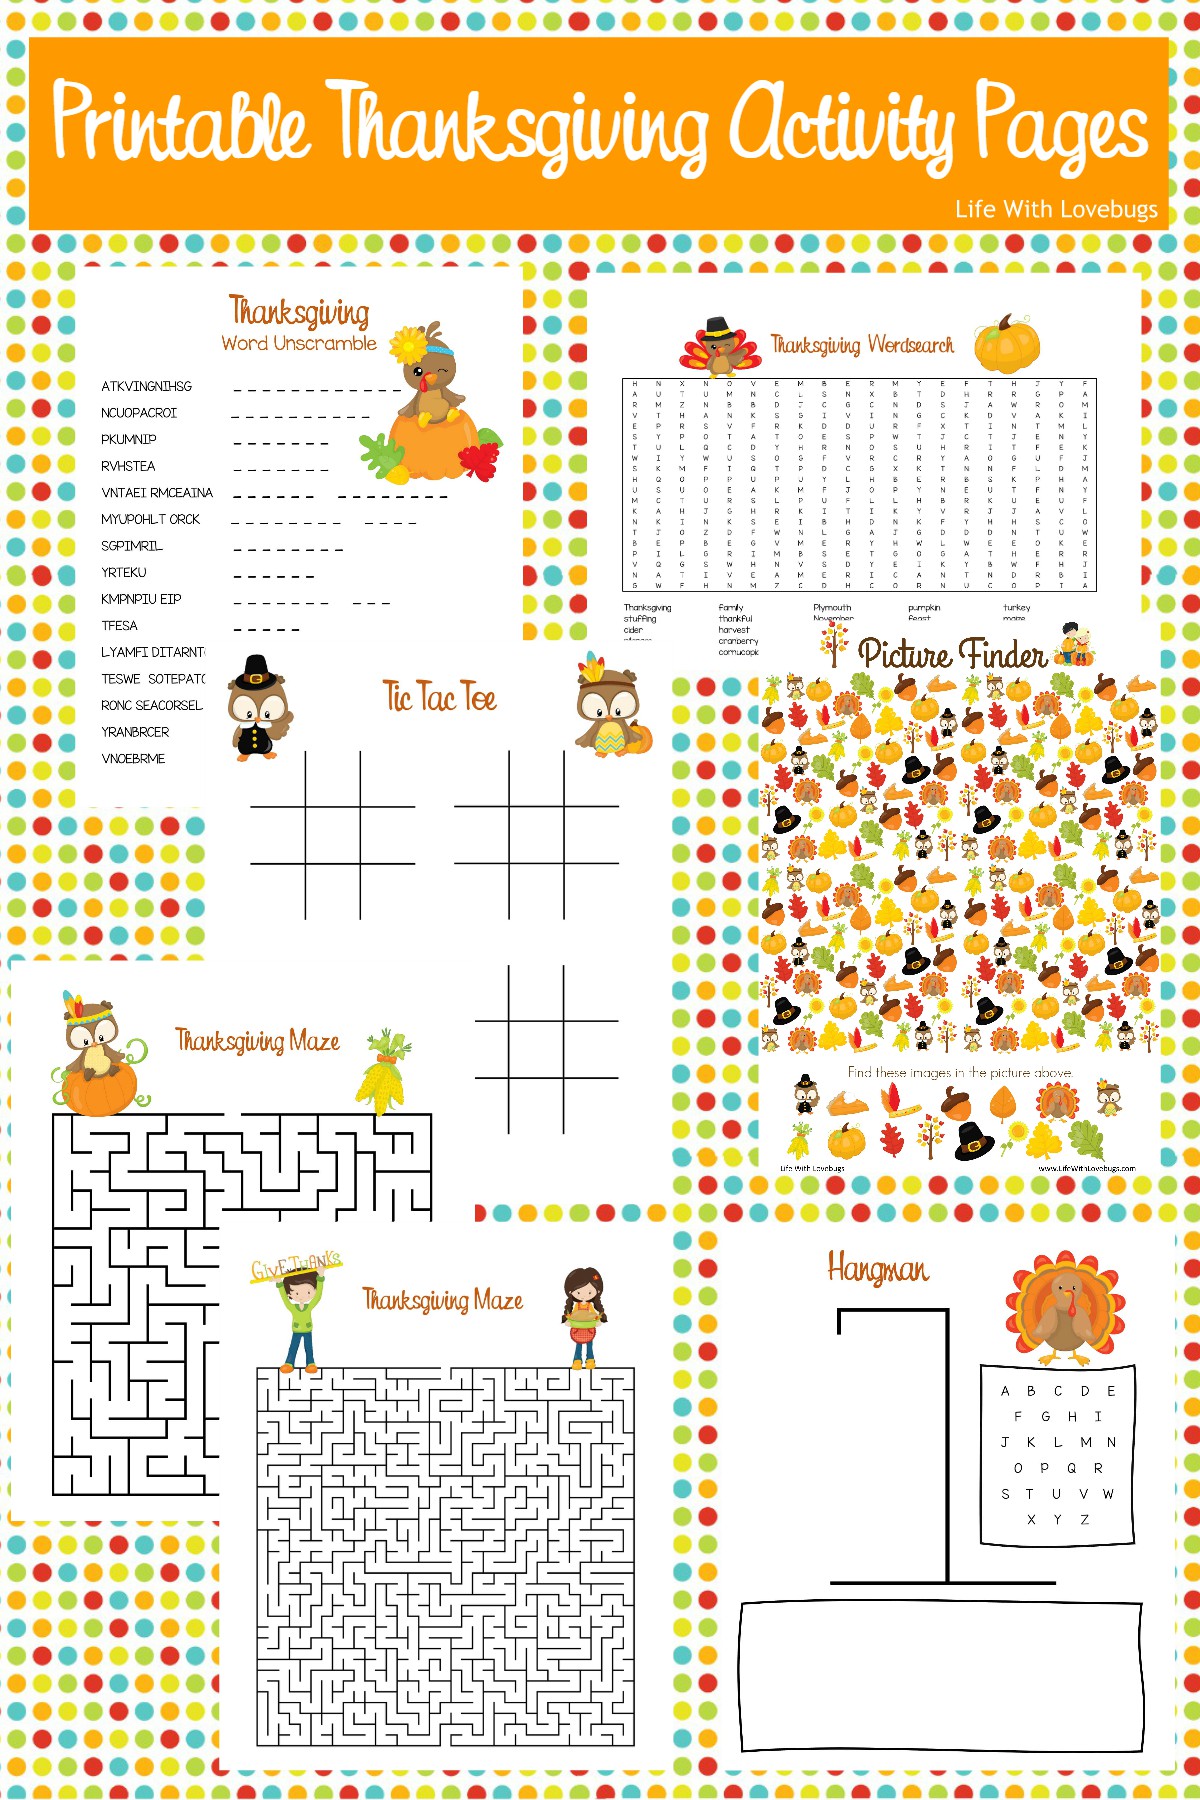 Thanksgiving Activities for Kids - Fun and Free Printable Activities -  Natural Beach Living